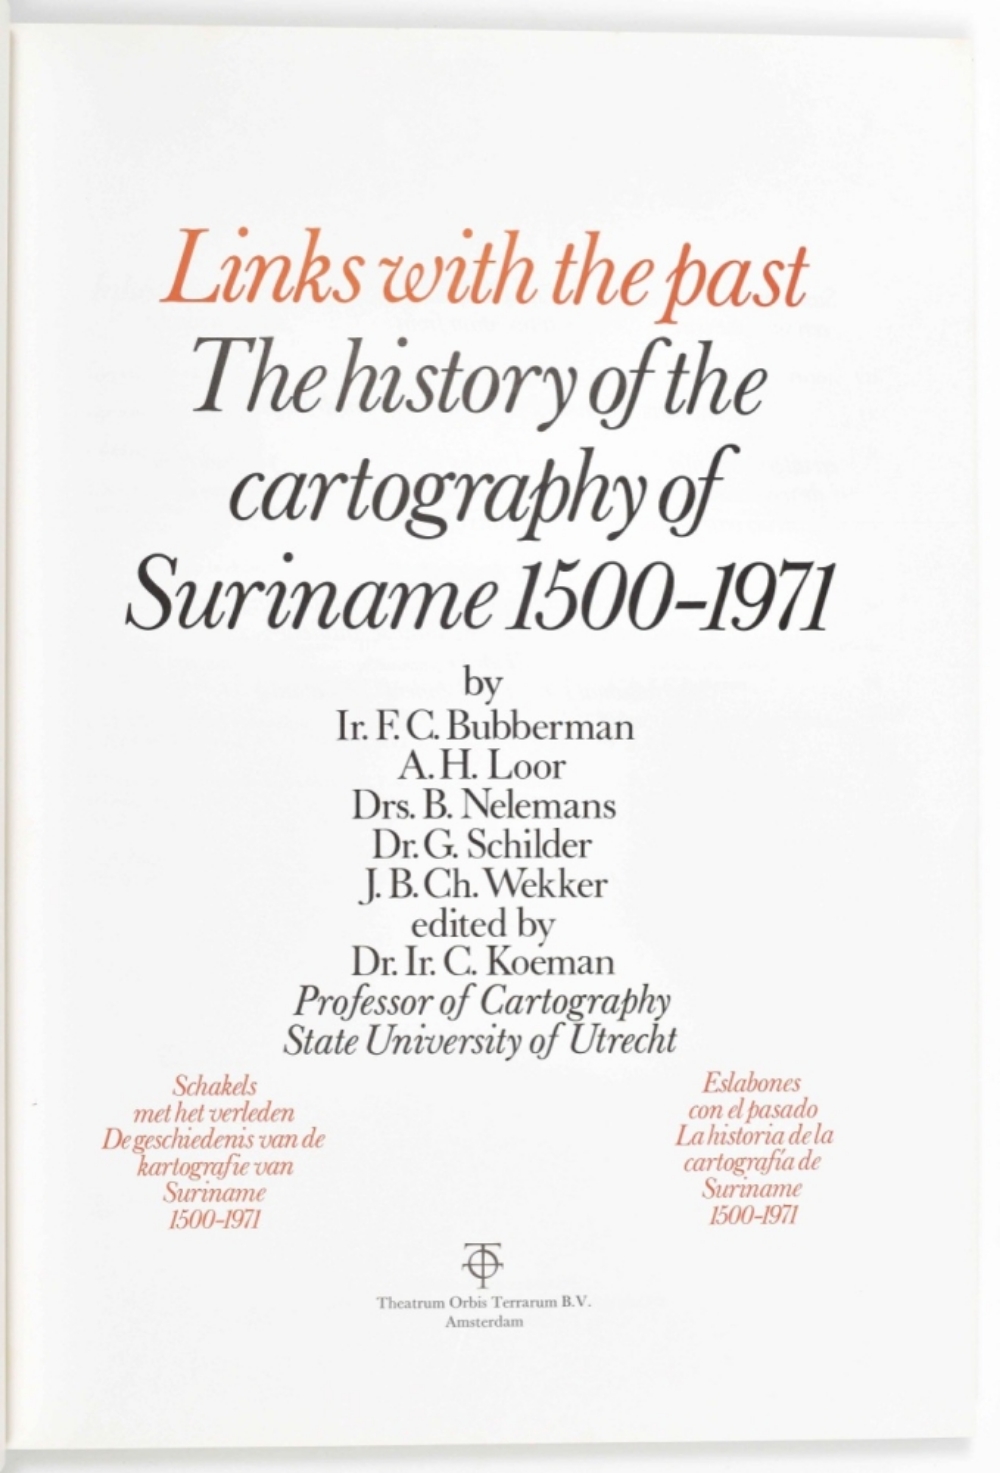 F.C. Bubberman et al. The History of the Cartography of Suriname 1500-1971 - Image 5 of 6